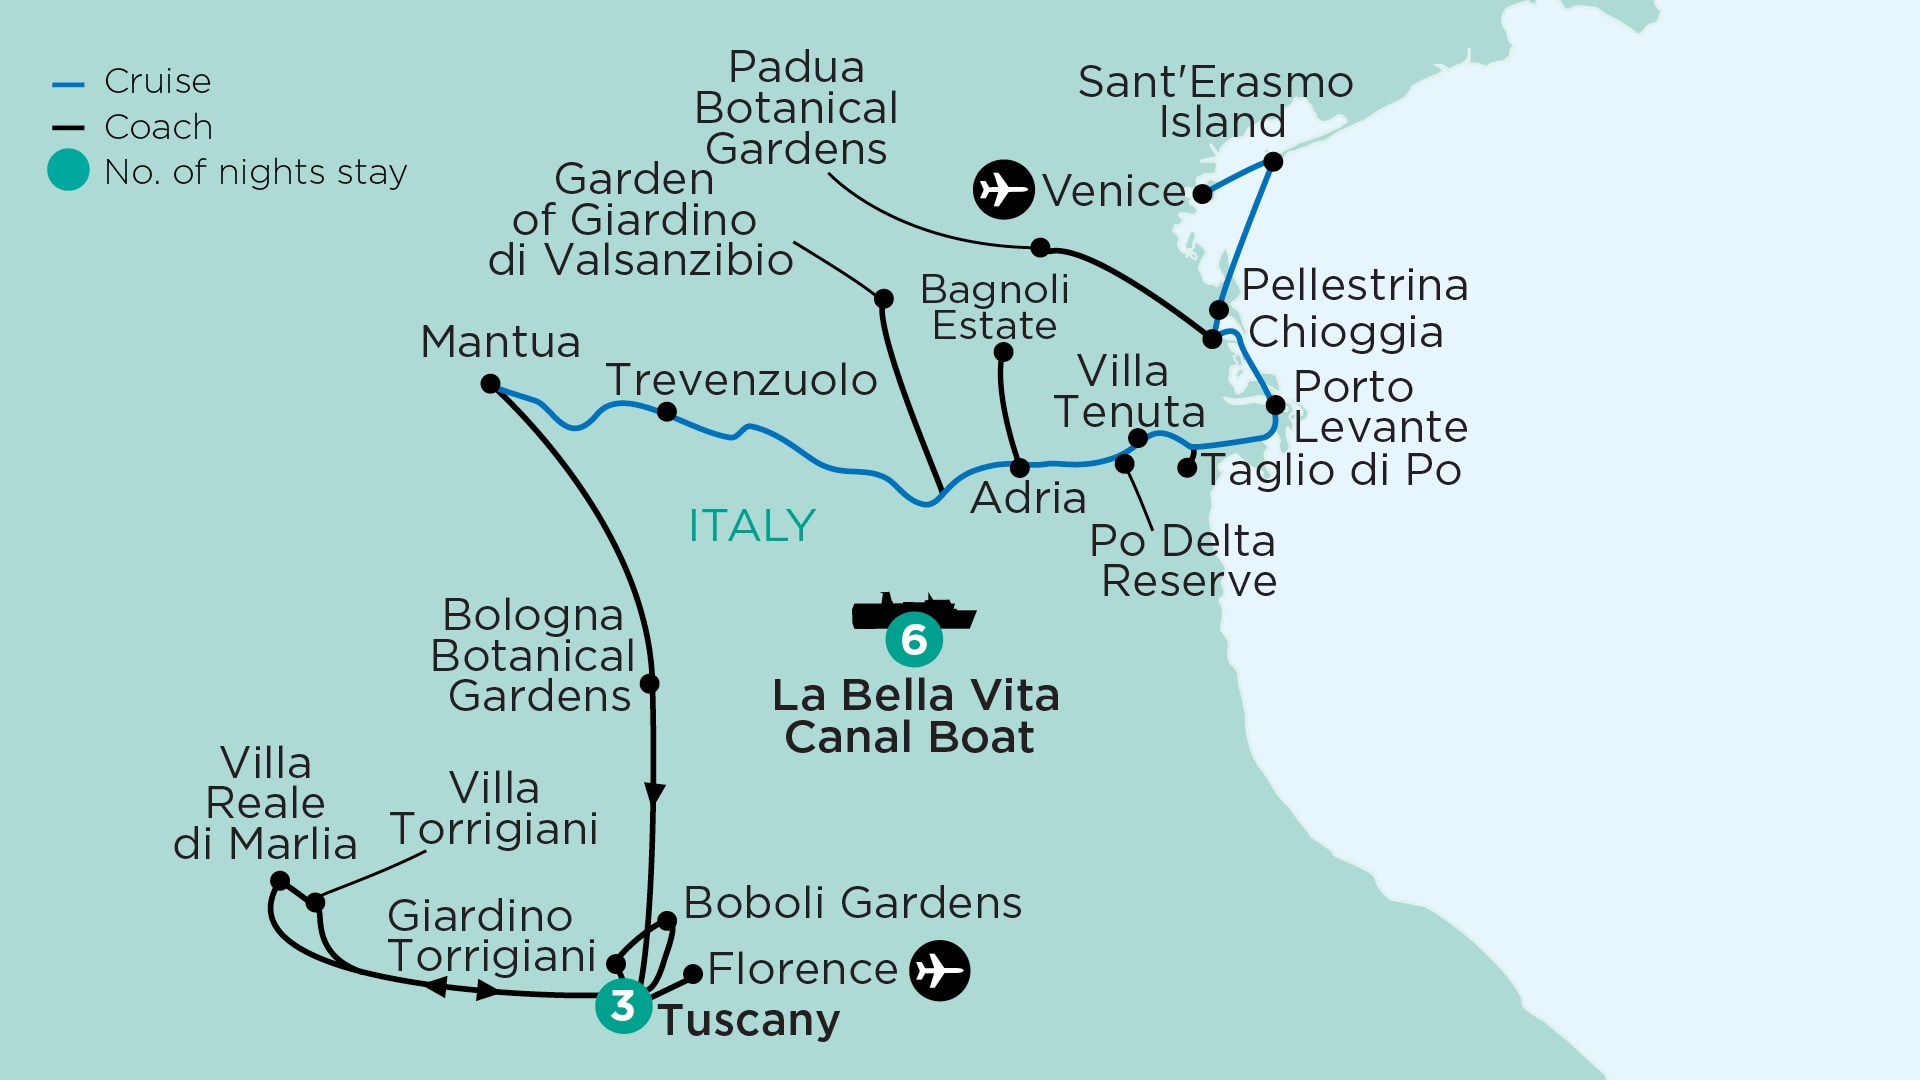 tourhub | APT | Renaissance Gardens of Italy by Canal Boat & Tuscan Landscapes | Tour Map